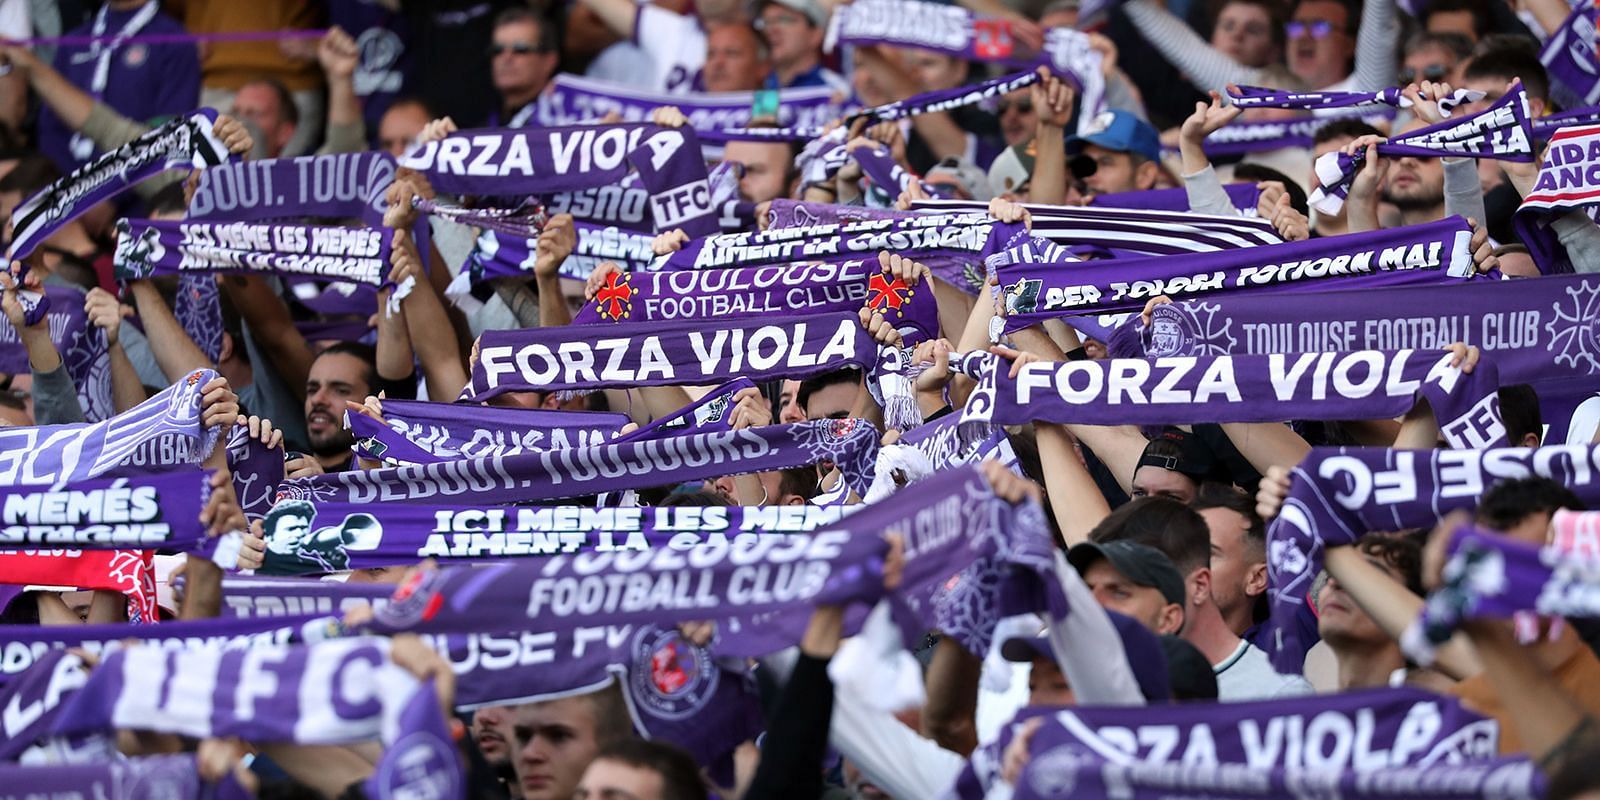 Toulouse will face Troyes on Wednesday 